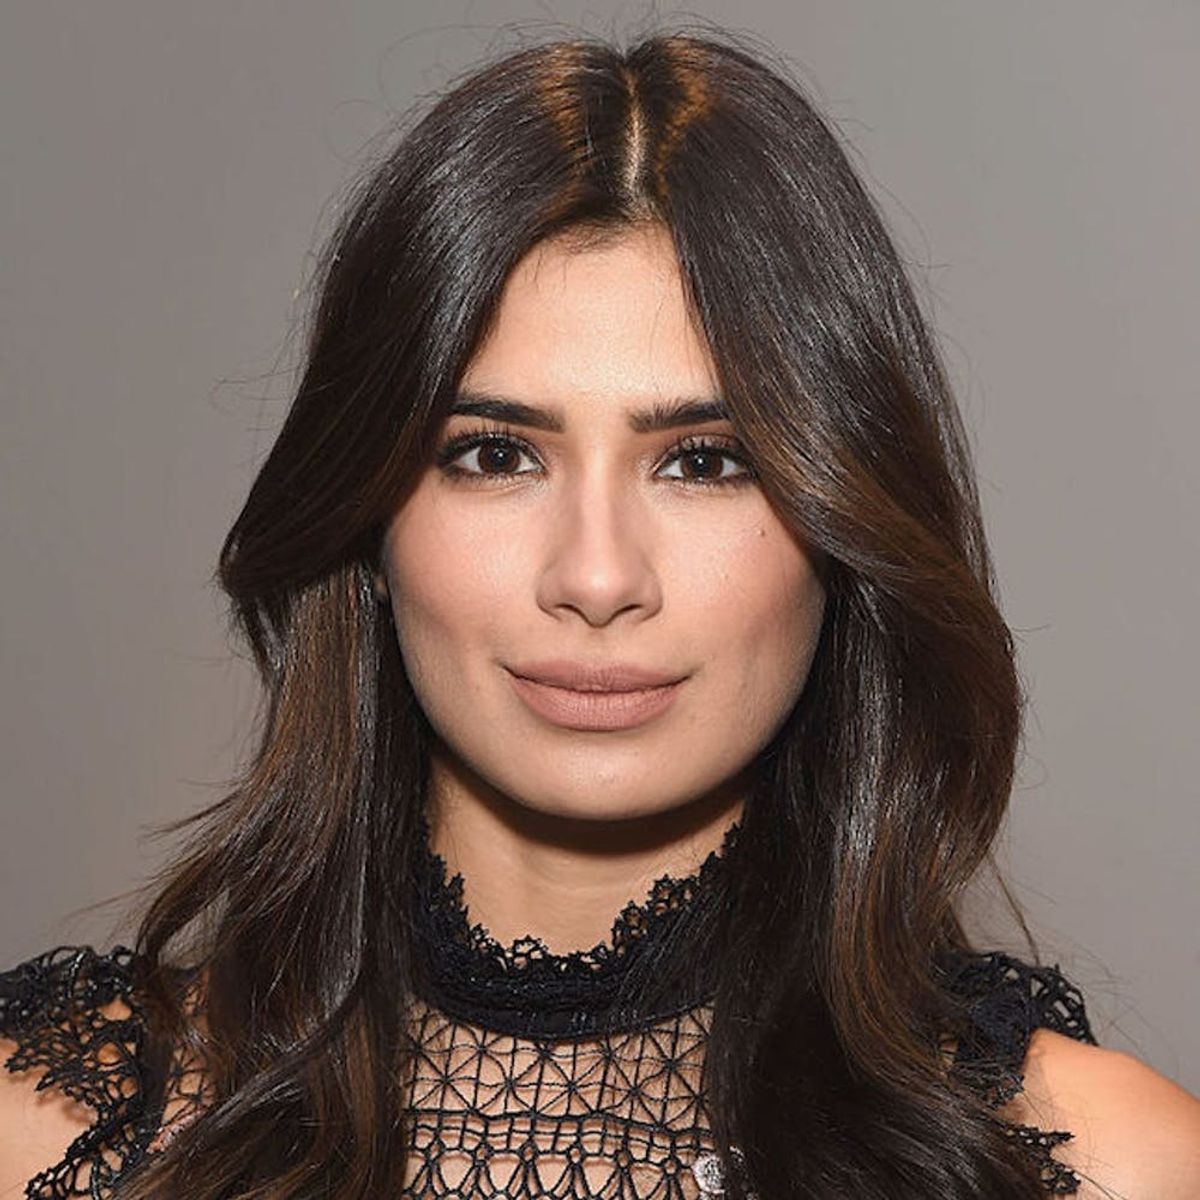 OITNB’s Diane Guerrero Is the Show’s Newest Star-Turned-Activist